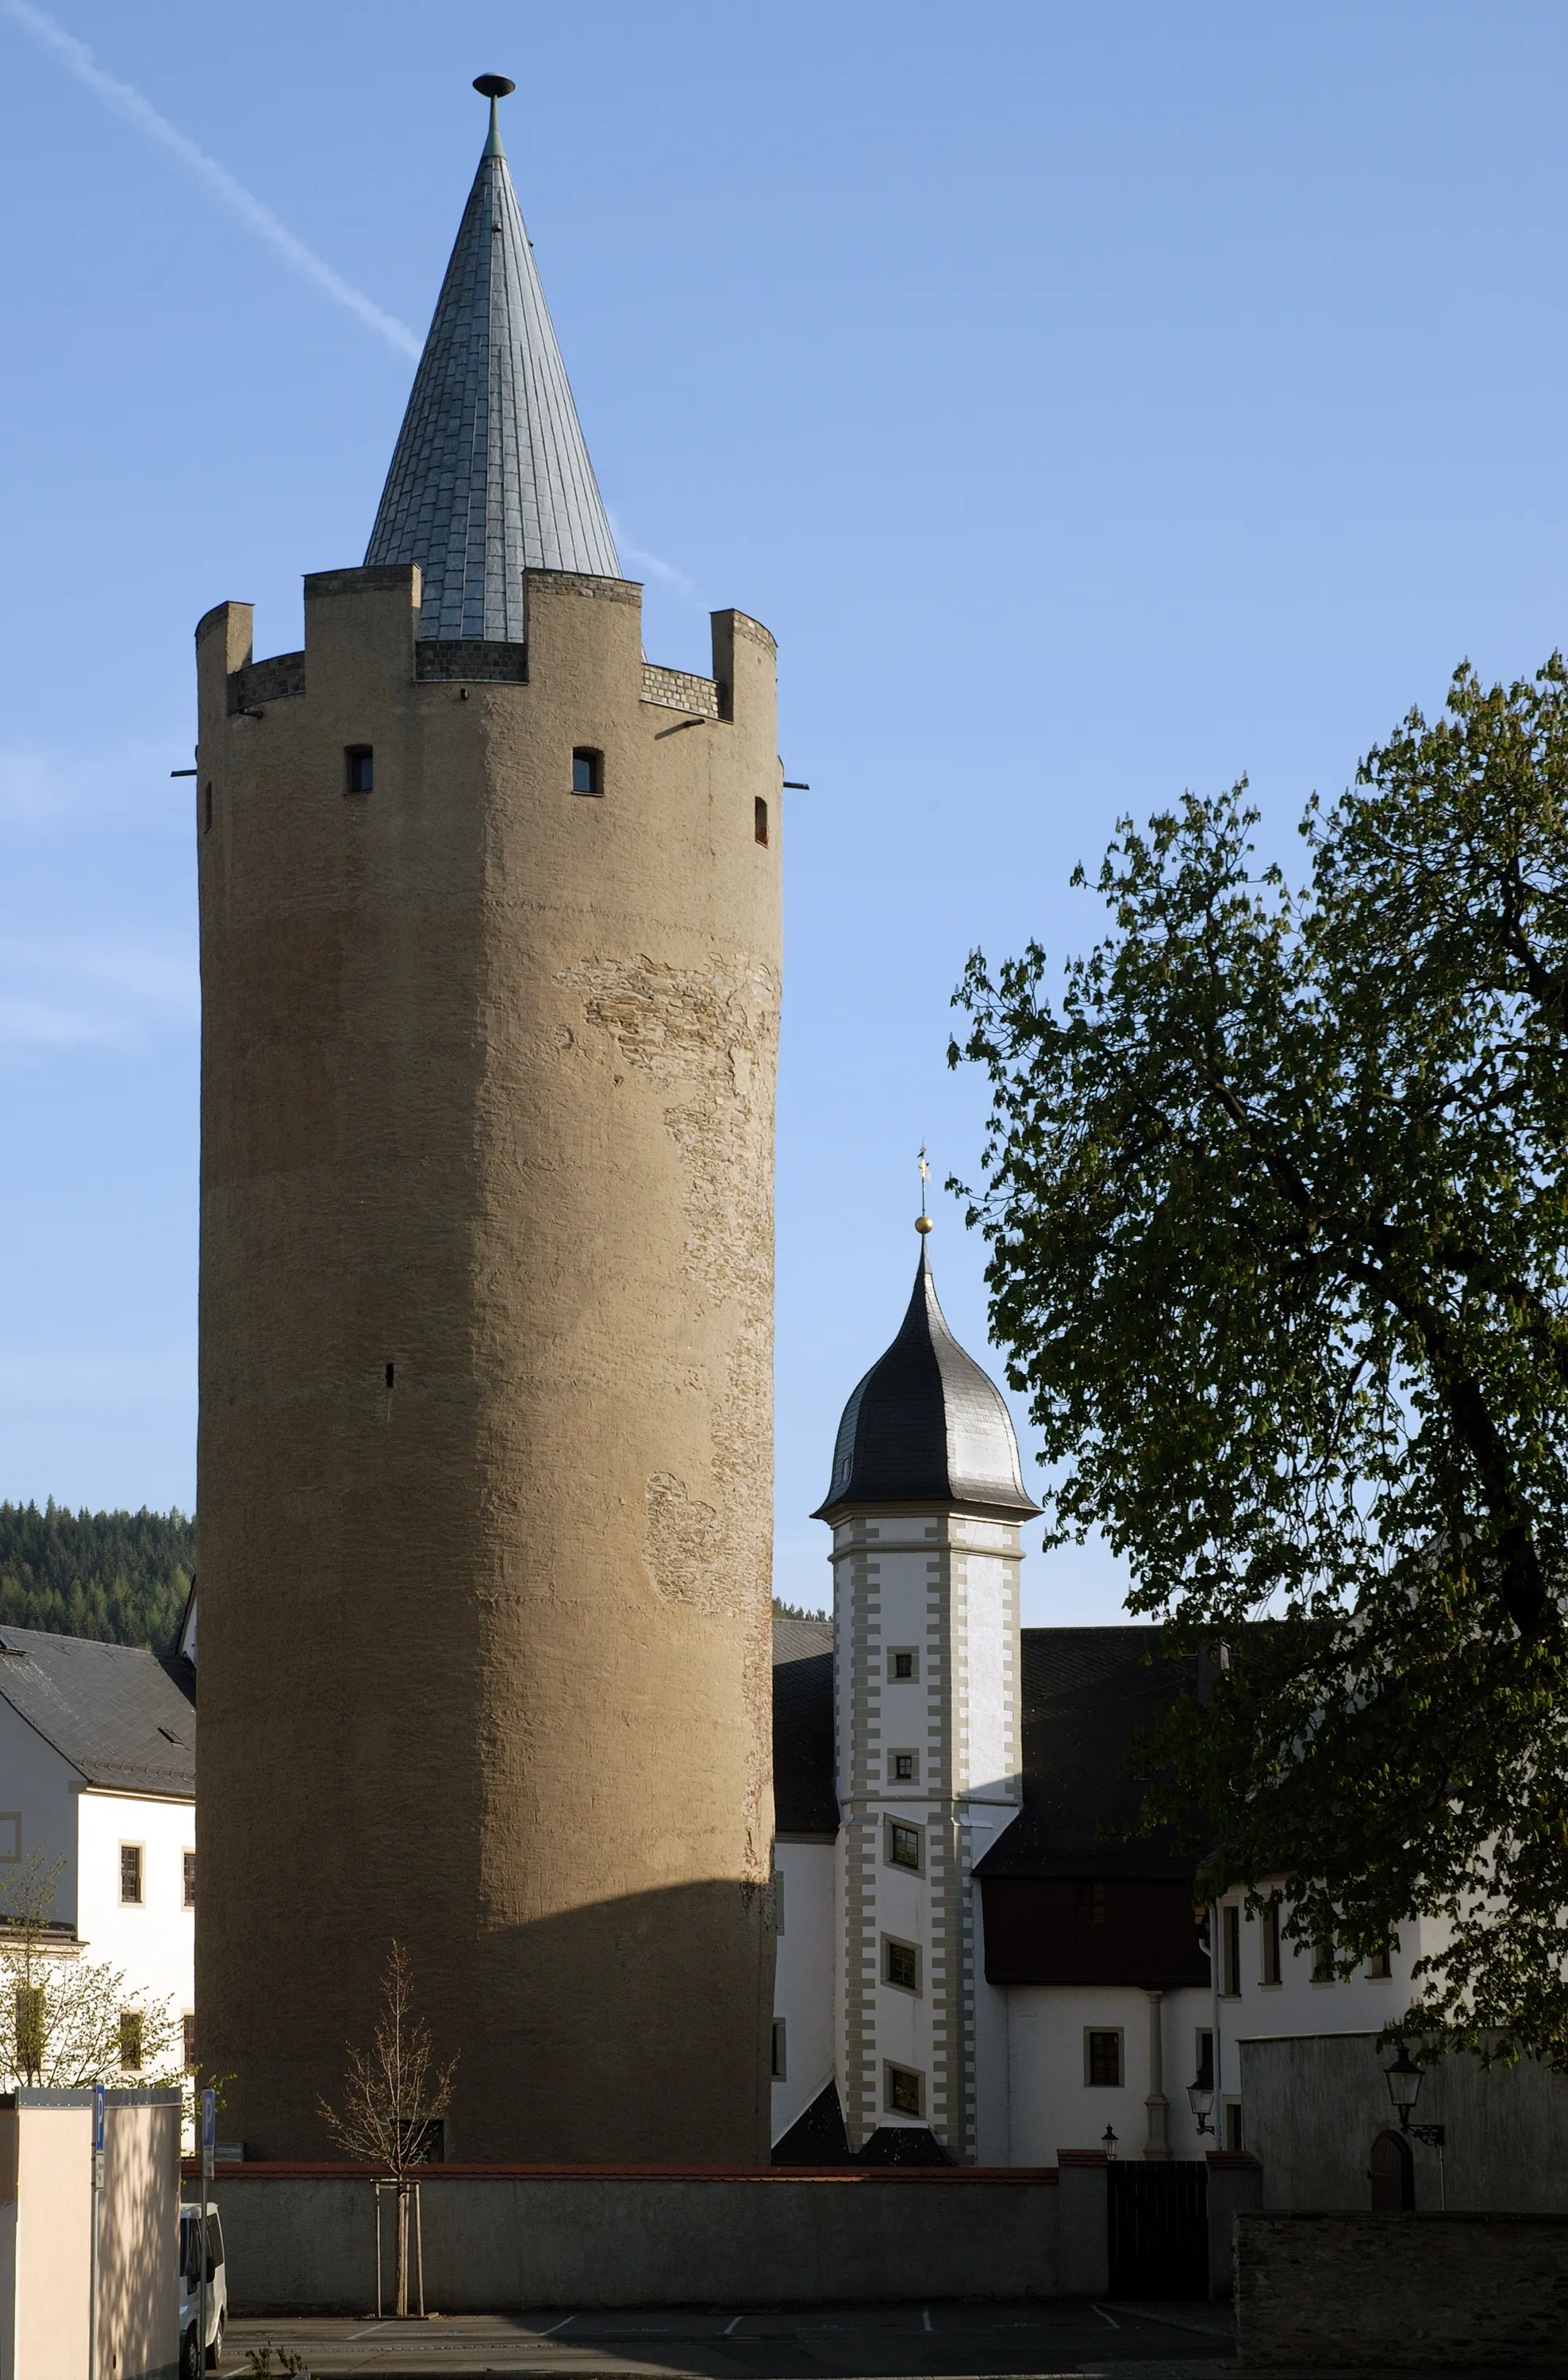 Photo showing: This image shows the "Dicker Heinrich" burgfried and "Schlanke Margarete" stair tower of the castle Wildeck in Zschopau, Germany.